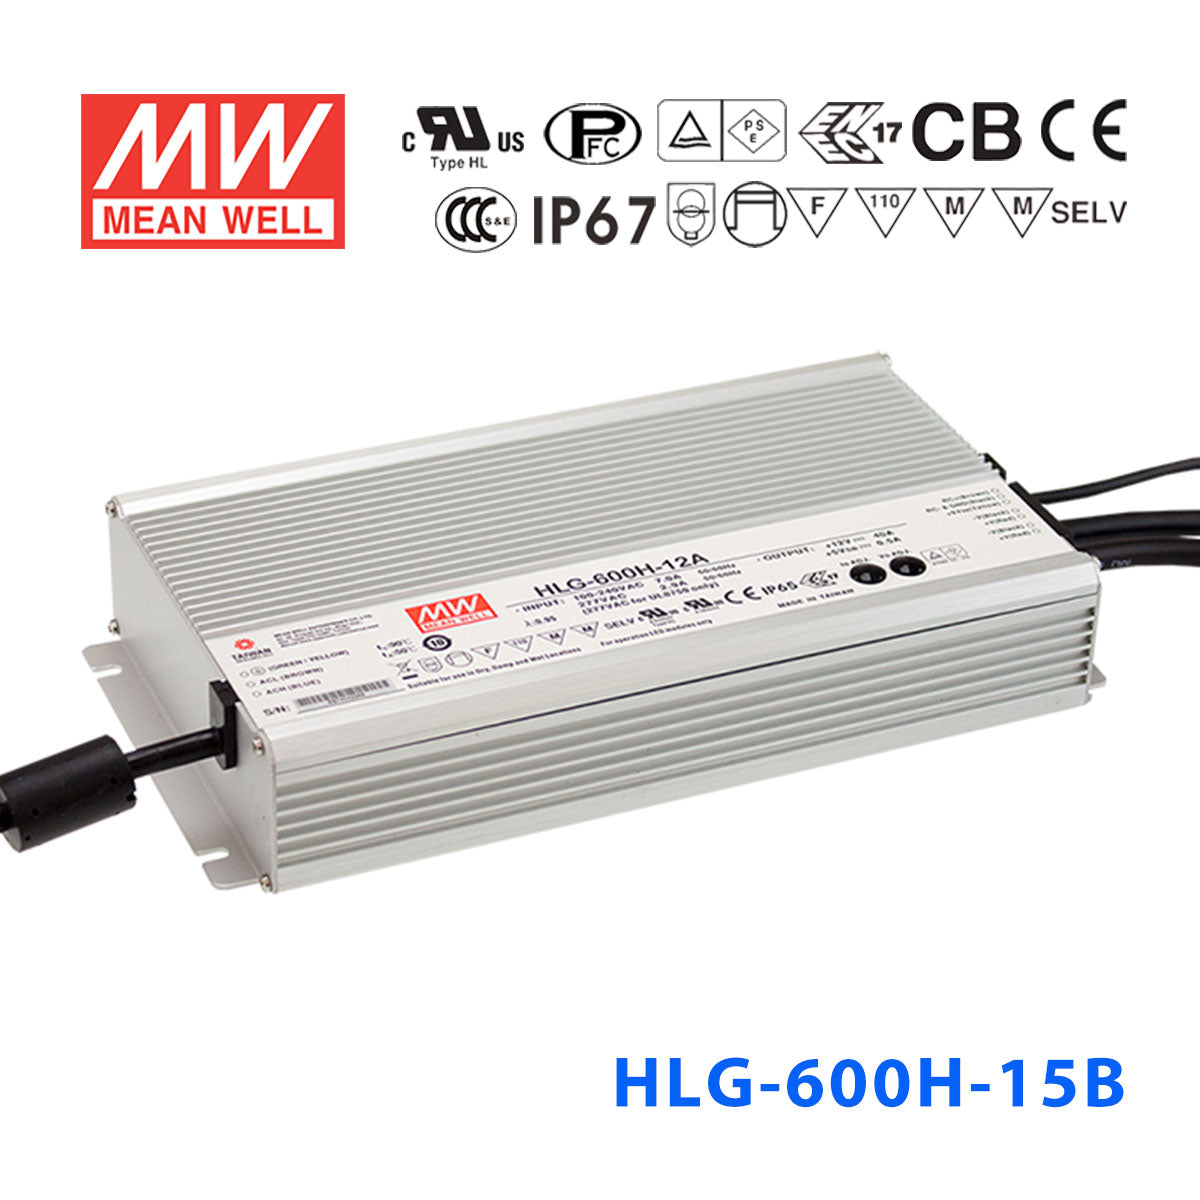 Mean Well HLG-600H-15AB Power Supply 540W 15V - Adjustable and Dimmable